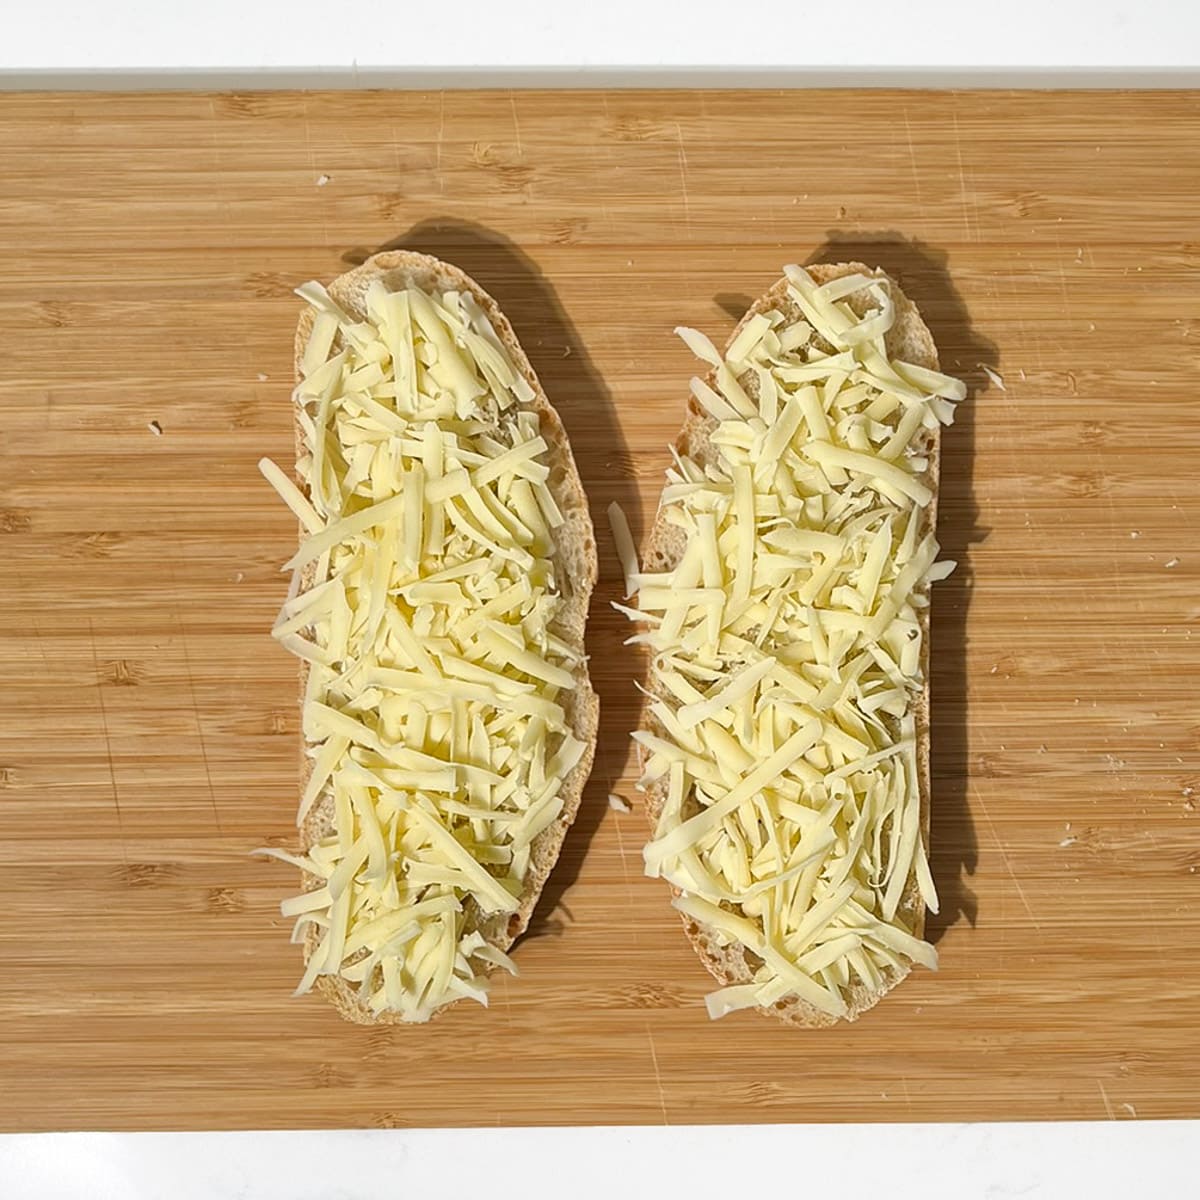 Two slices of bread topped with grated Emmental cheese.